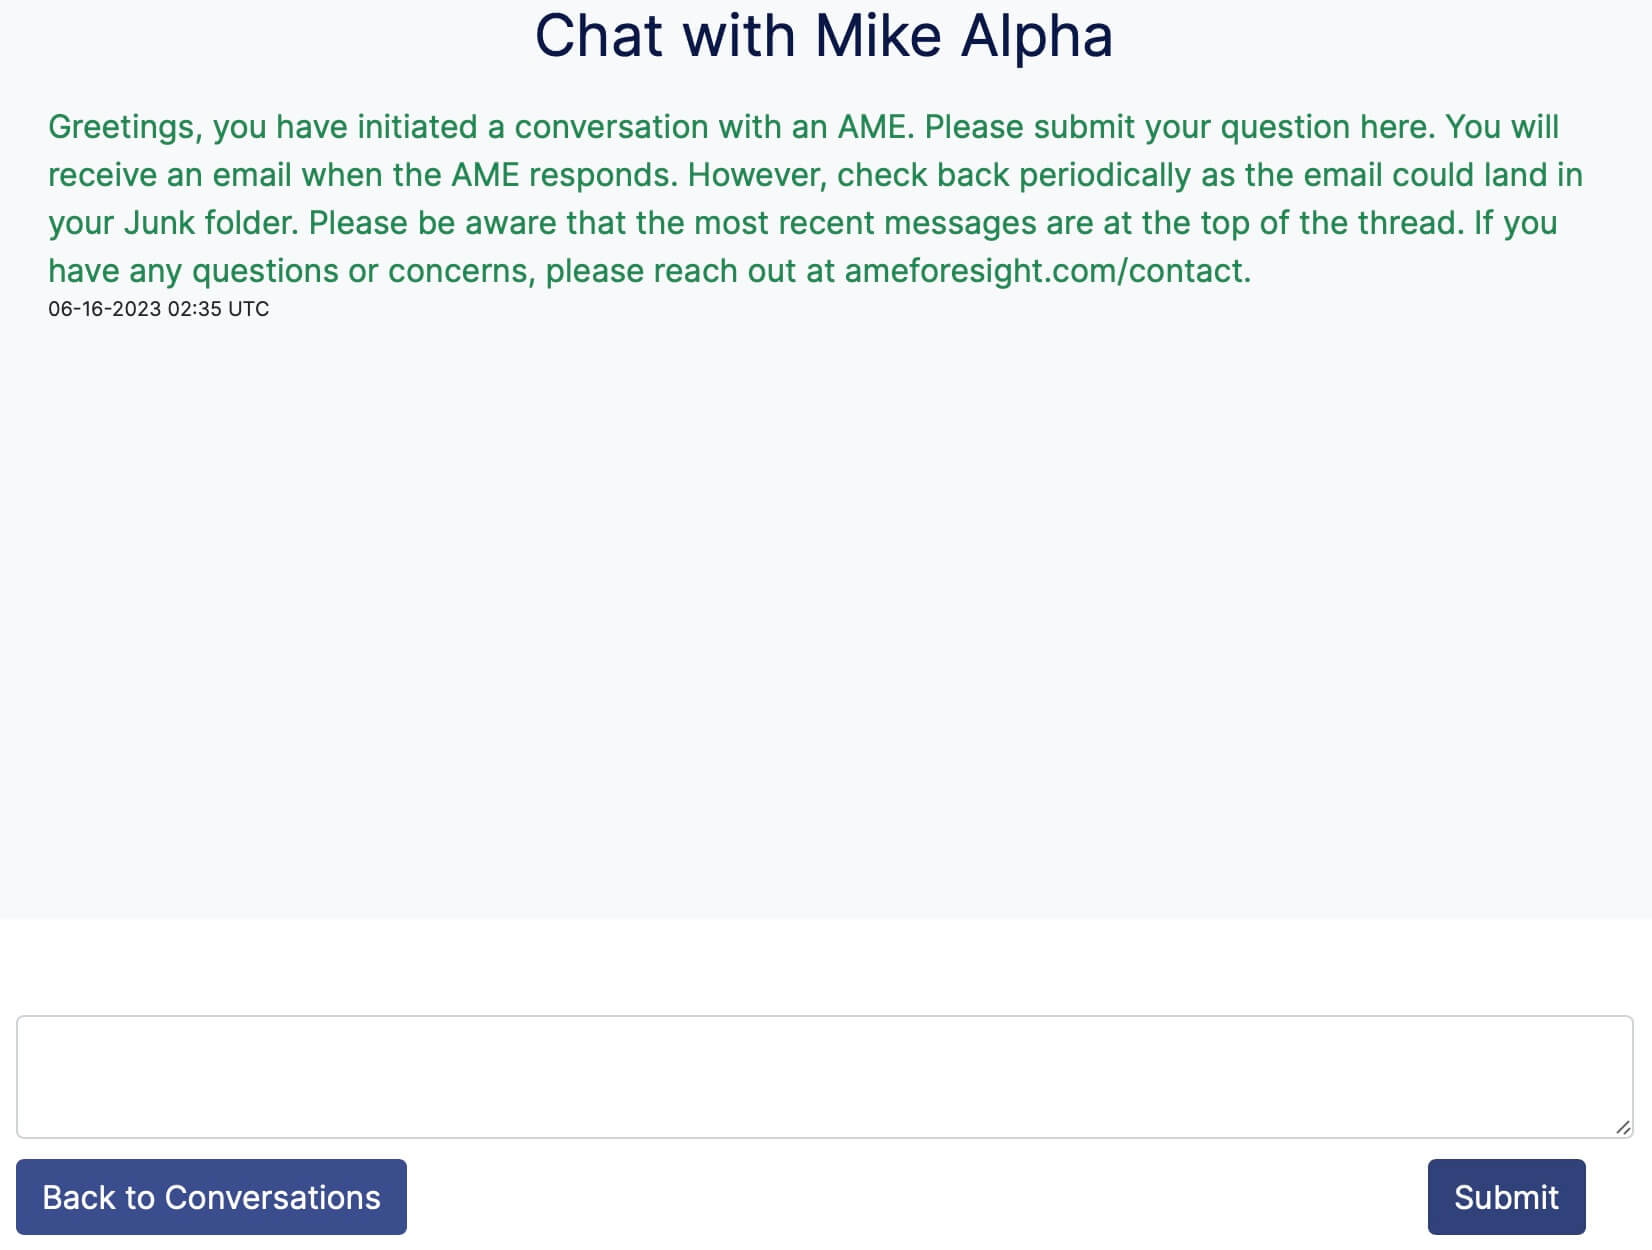 Image of a chat session